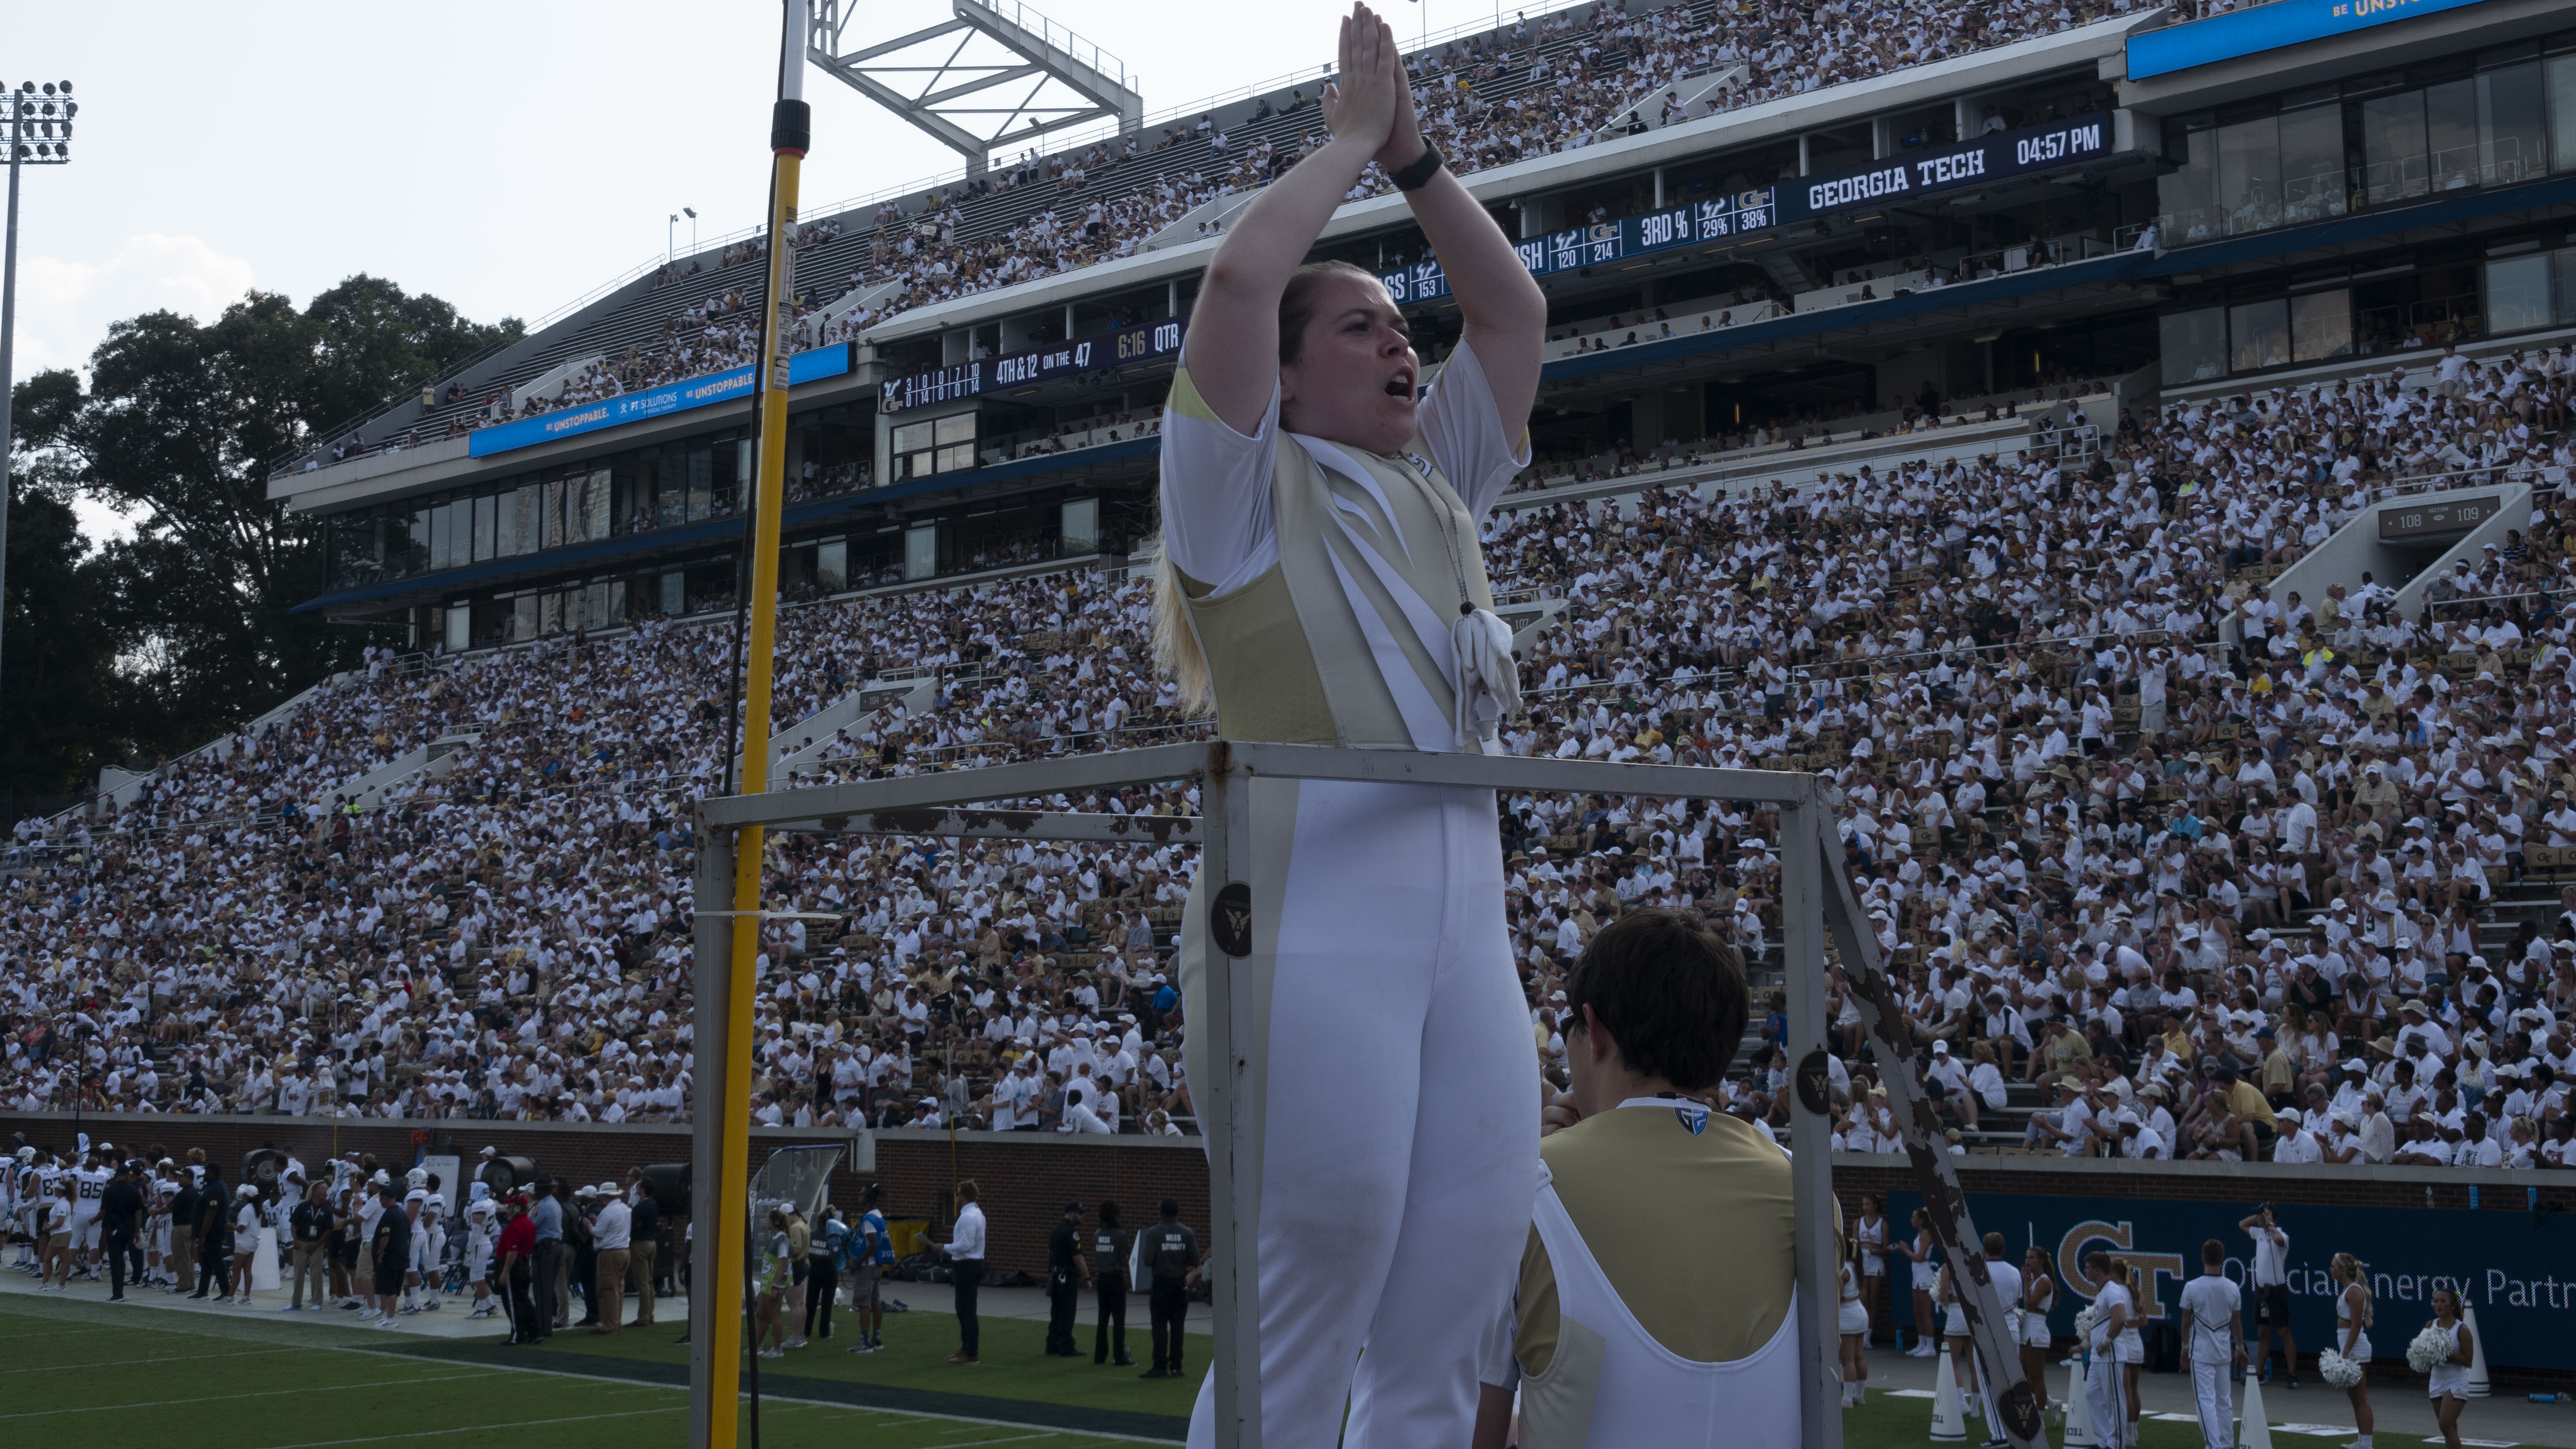 A drum major leading the band at a game.